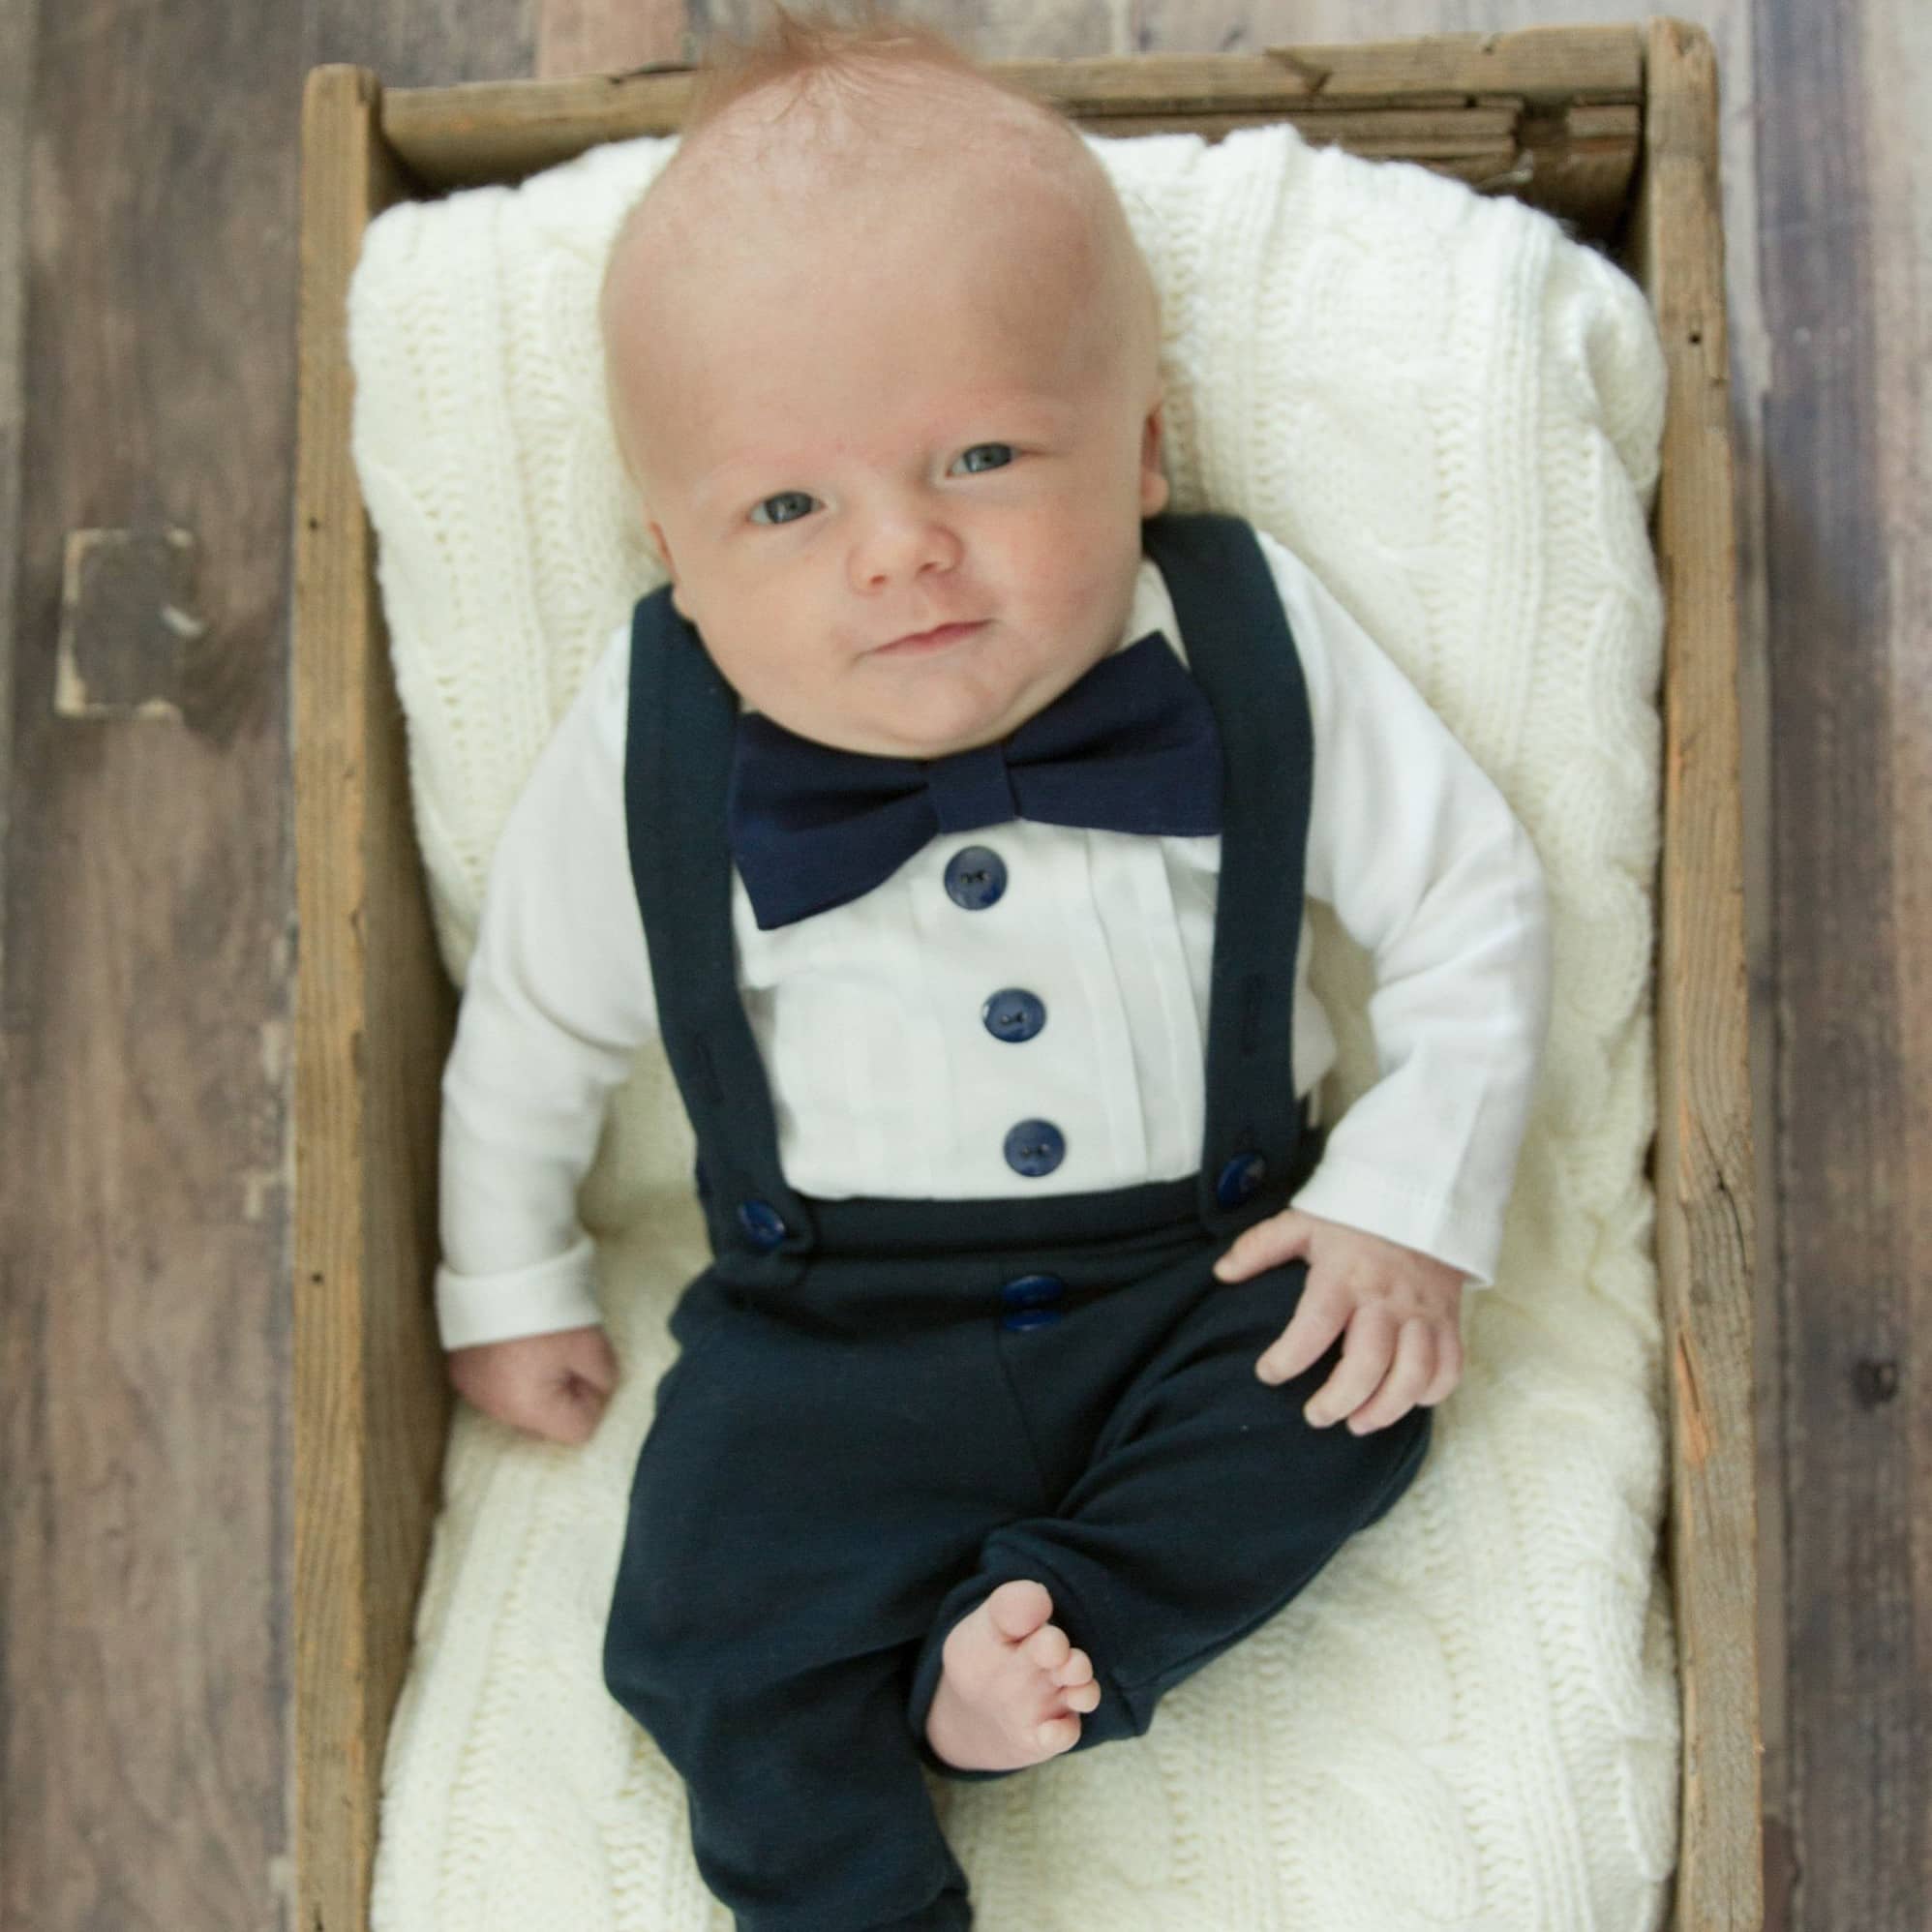 Baby Boy Blue All-in-One Suit Wedding Christening Formal Party Smart Outfit 0-9m 